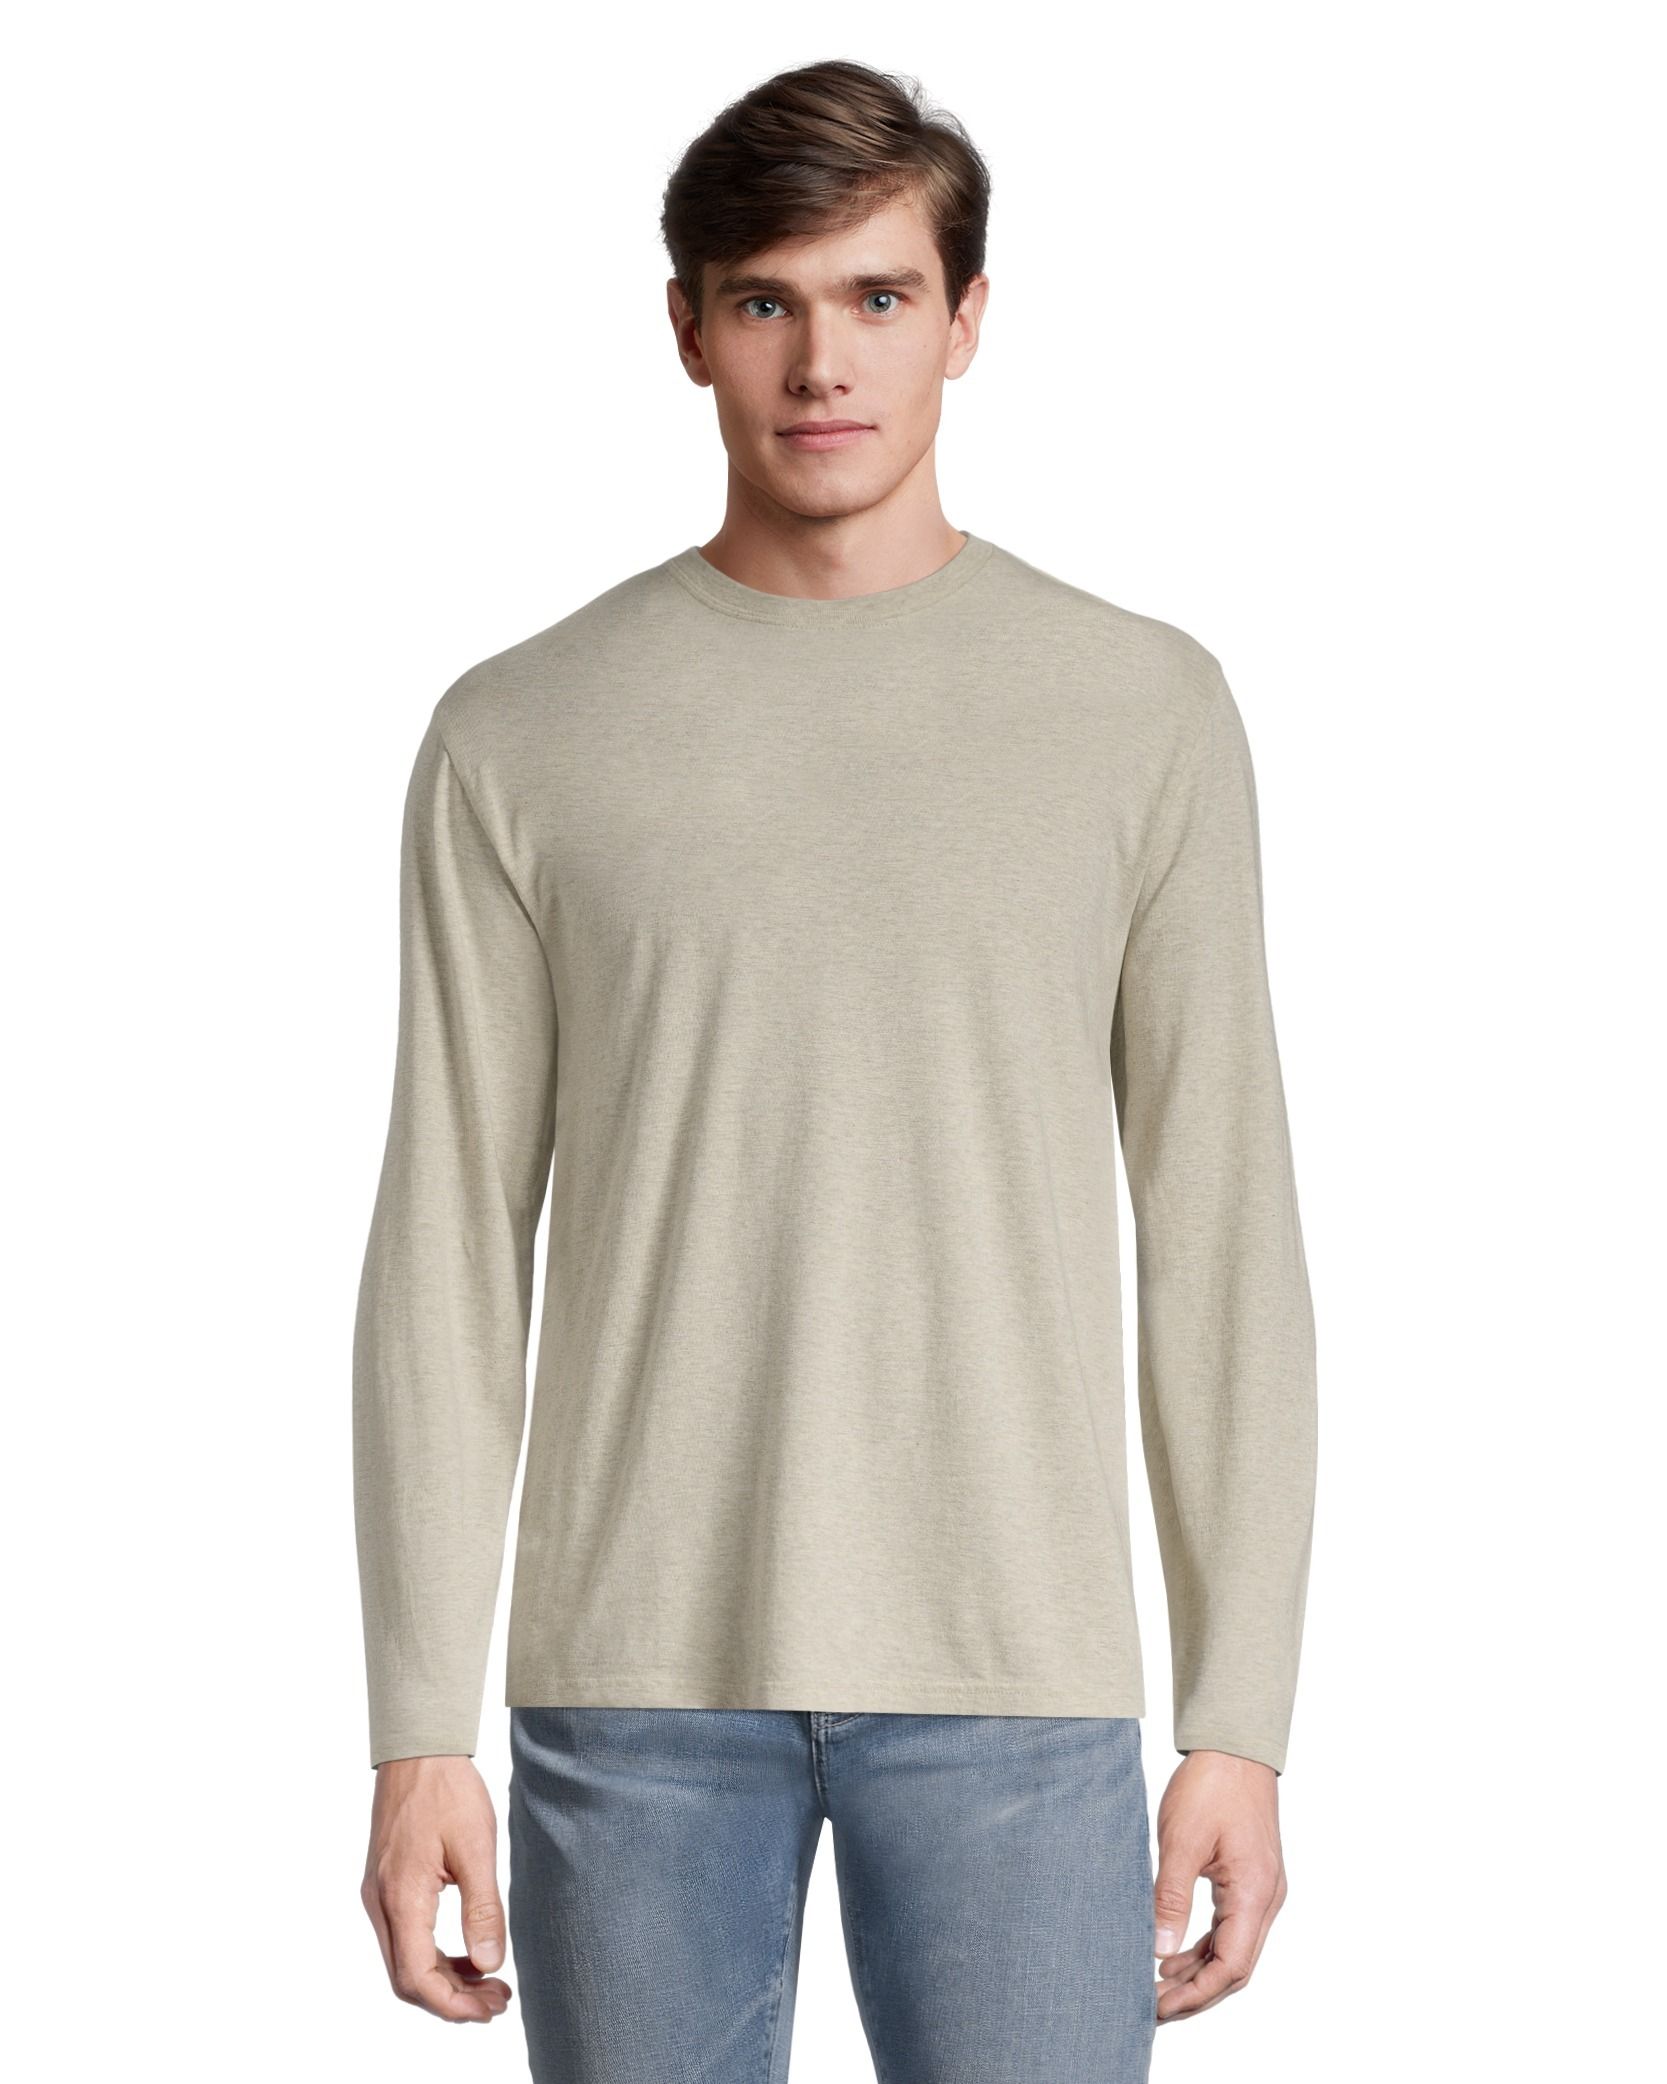 Men's 50 Wash Long Sleeve Classic Fit Crew Neck T-Shirt | Marks